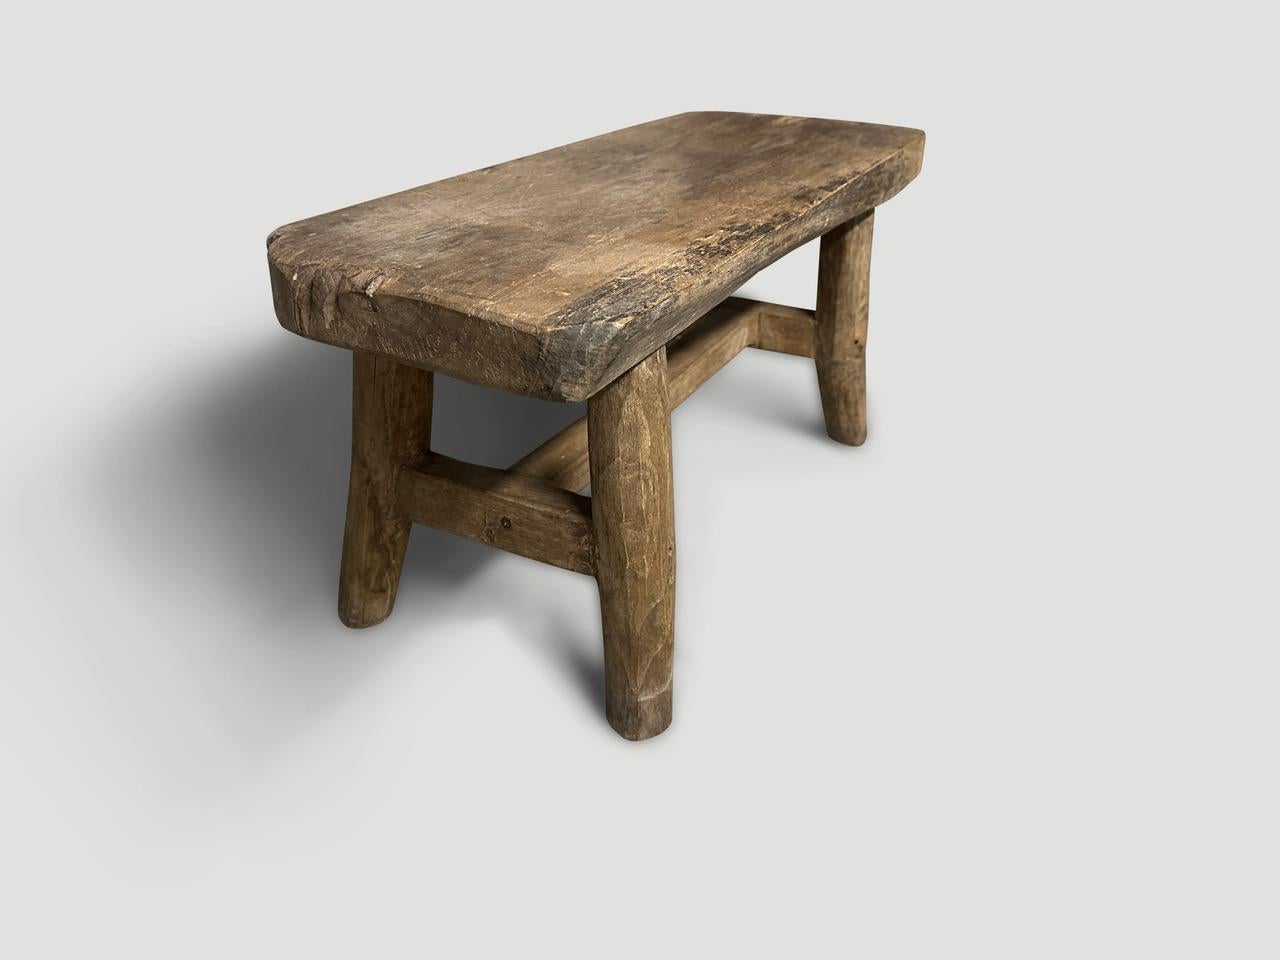 Organic Modern Andrianna Shamaris Antique Side Table or Bench For Sale